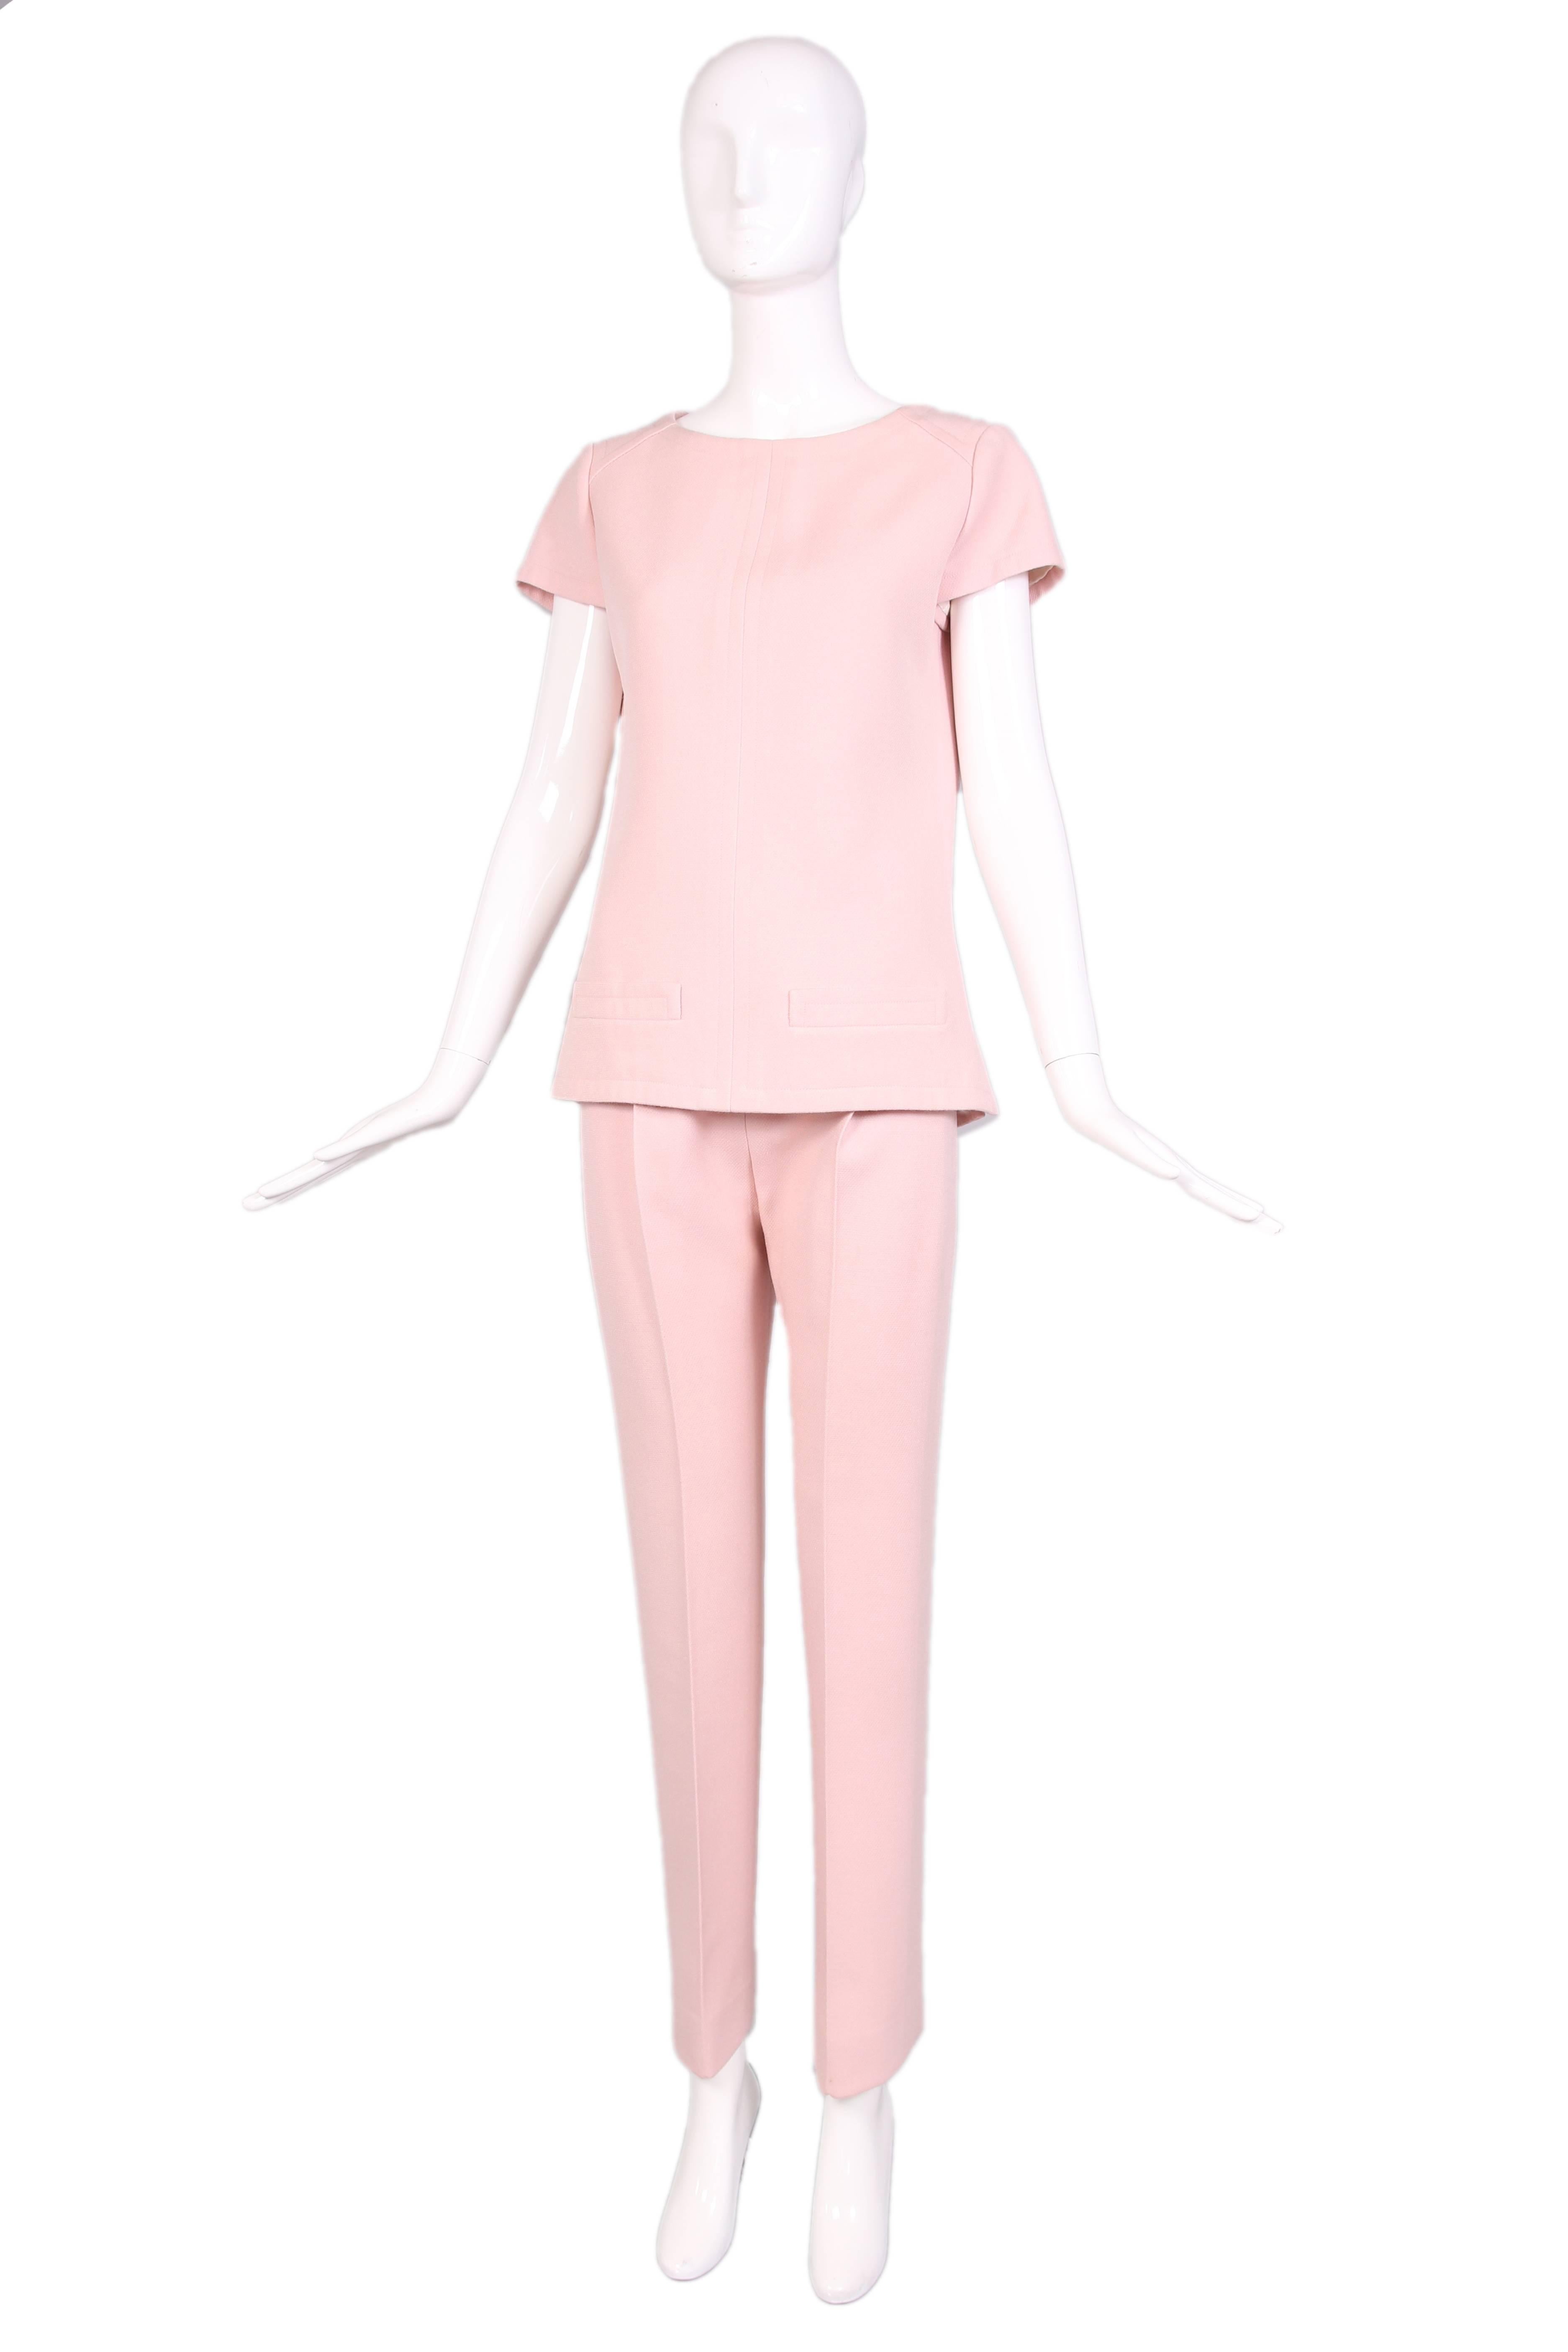 1960's Courreges for Harrods baby pink cap sleeve tunic top with two front pockets and matching trousers. 100% silk lining in both pieces. In excellent condition. No size tag, consult measurements.
MEASUREMENTS:
Top:
Bust - 38